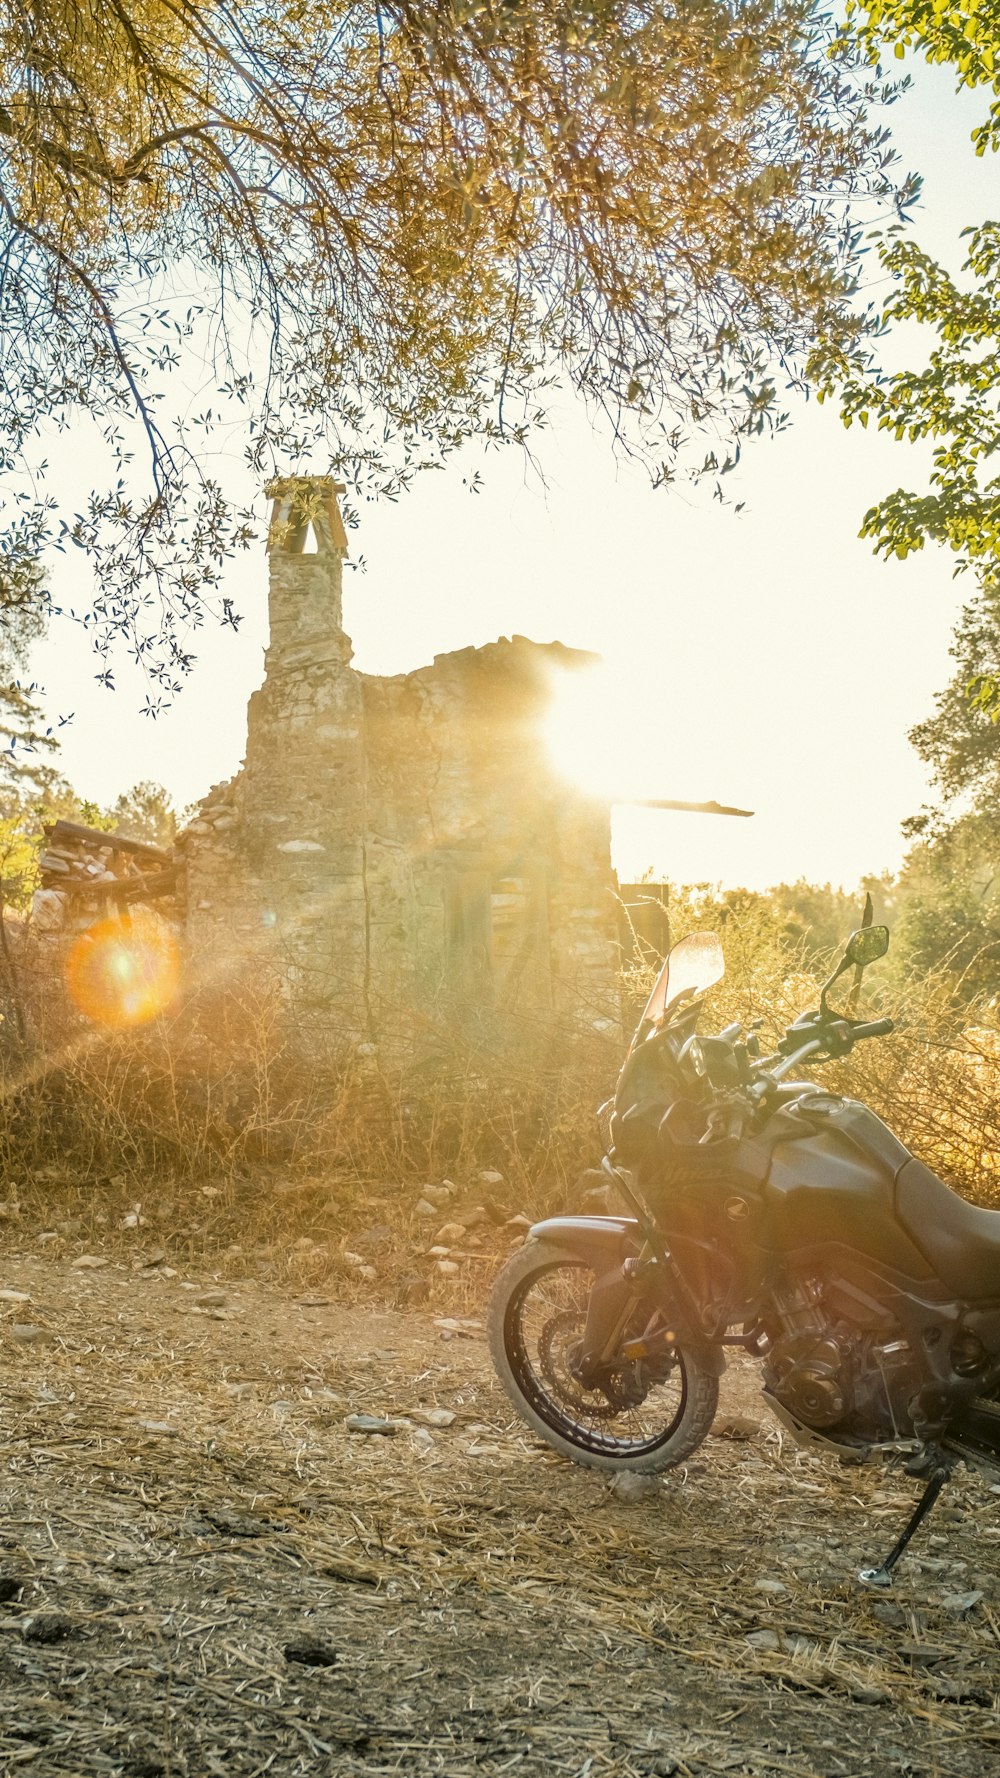 a motorcycle parked in front of a stone structure